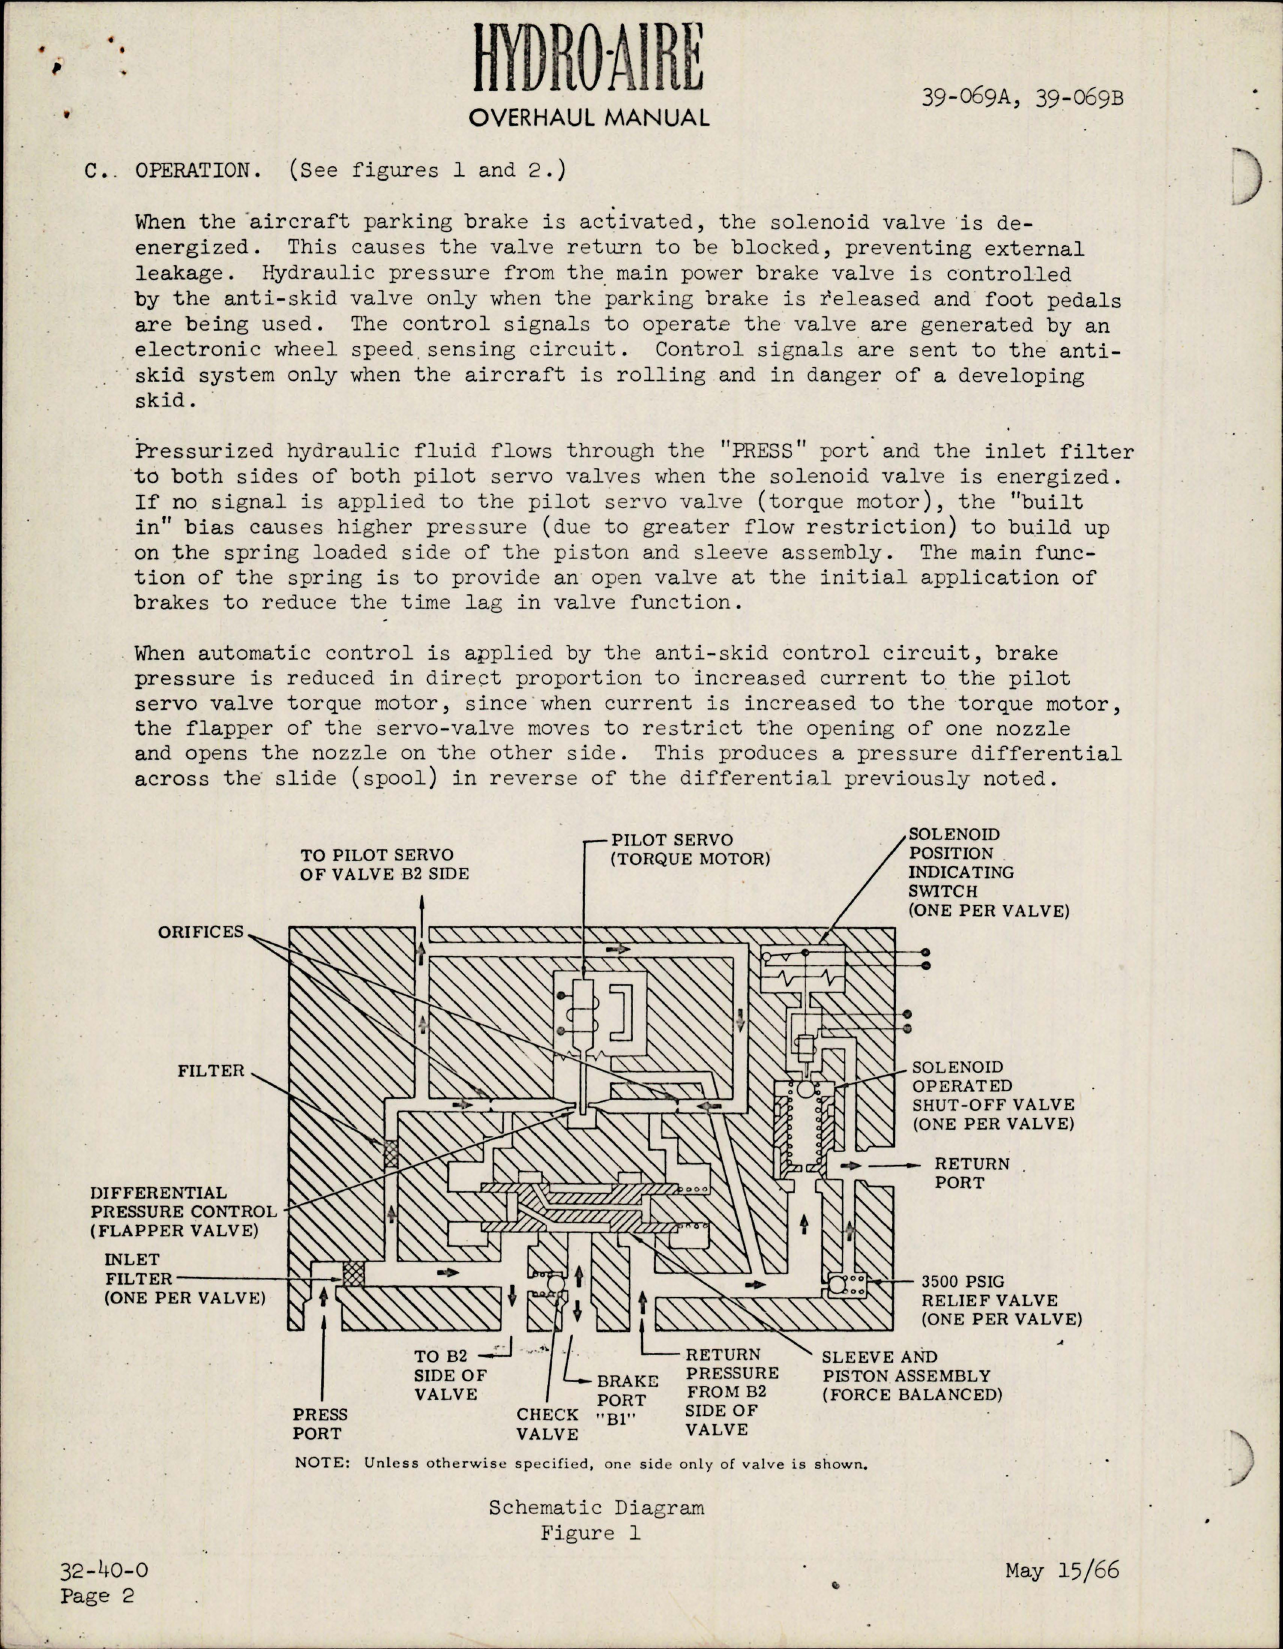 Sample page 7 from AirCorps Library document: Overhaul Manual for Dual Pressure Control Valve - Parts 39-069A and 39-069B 